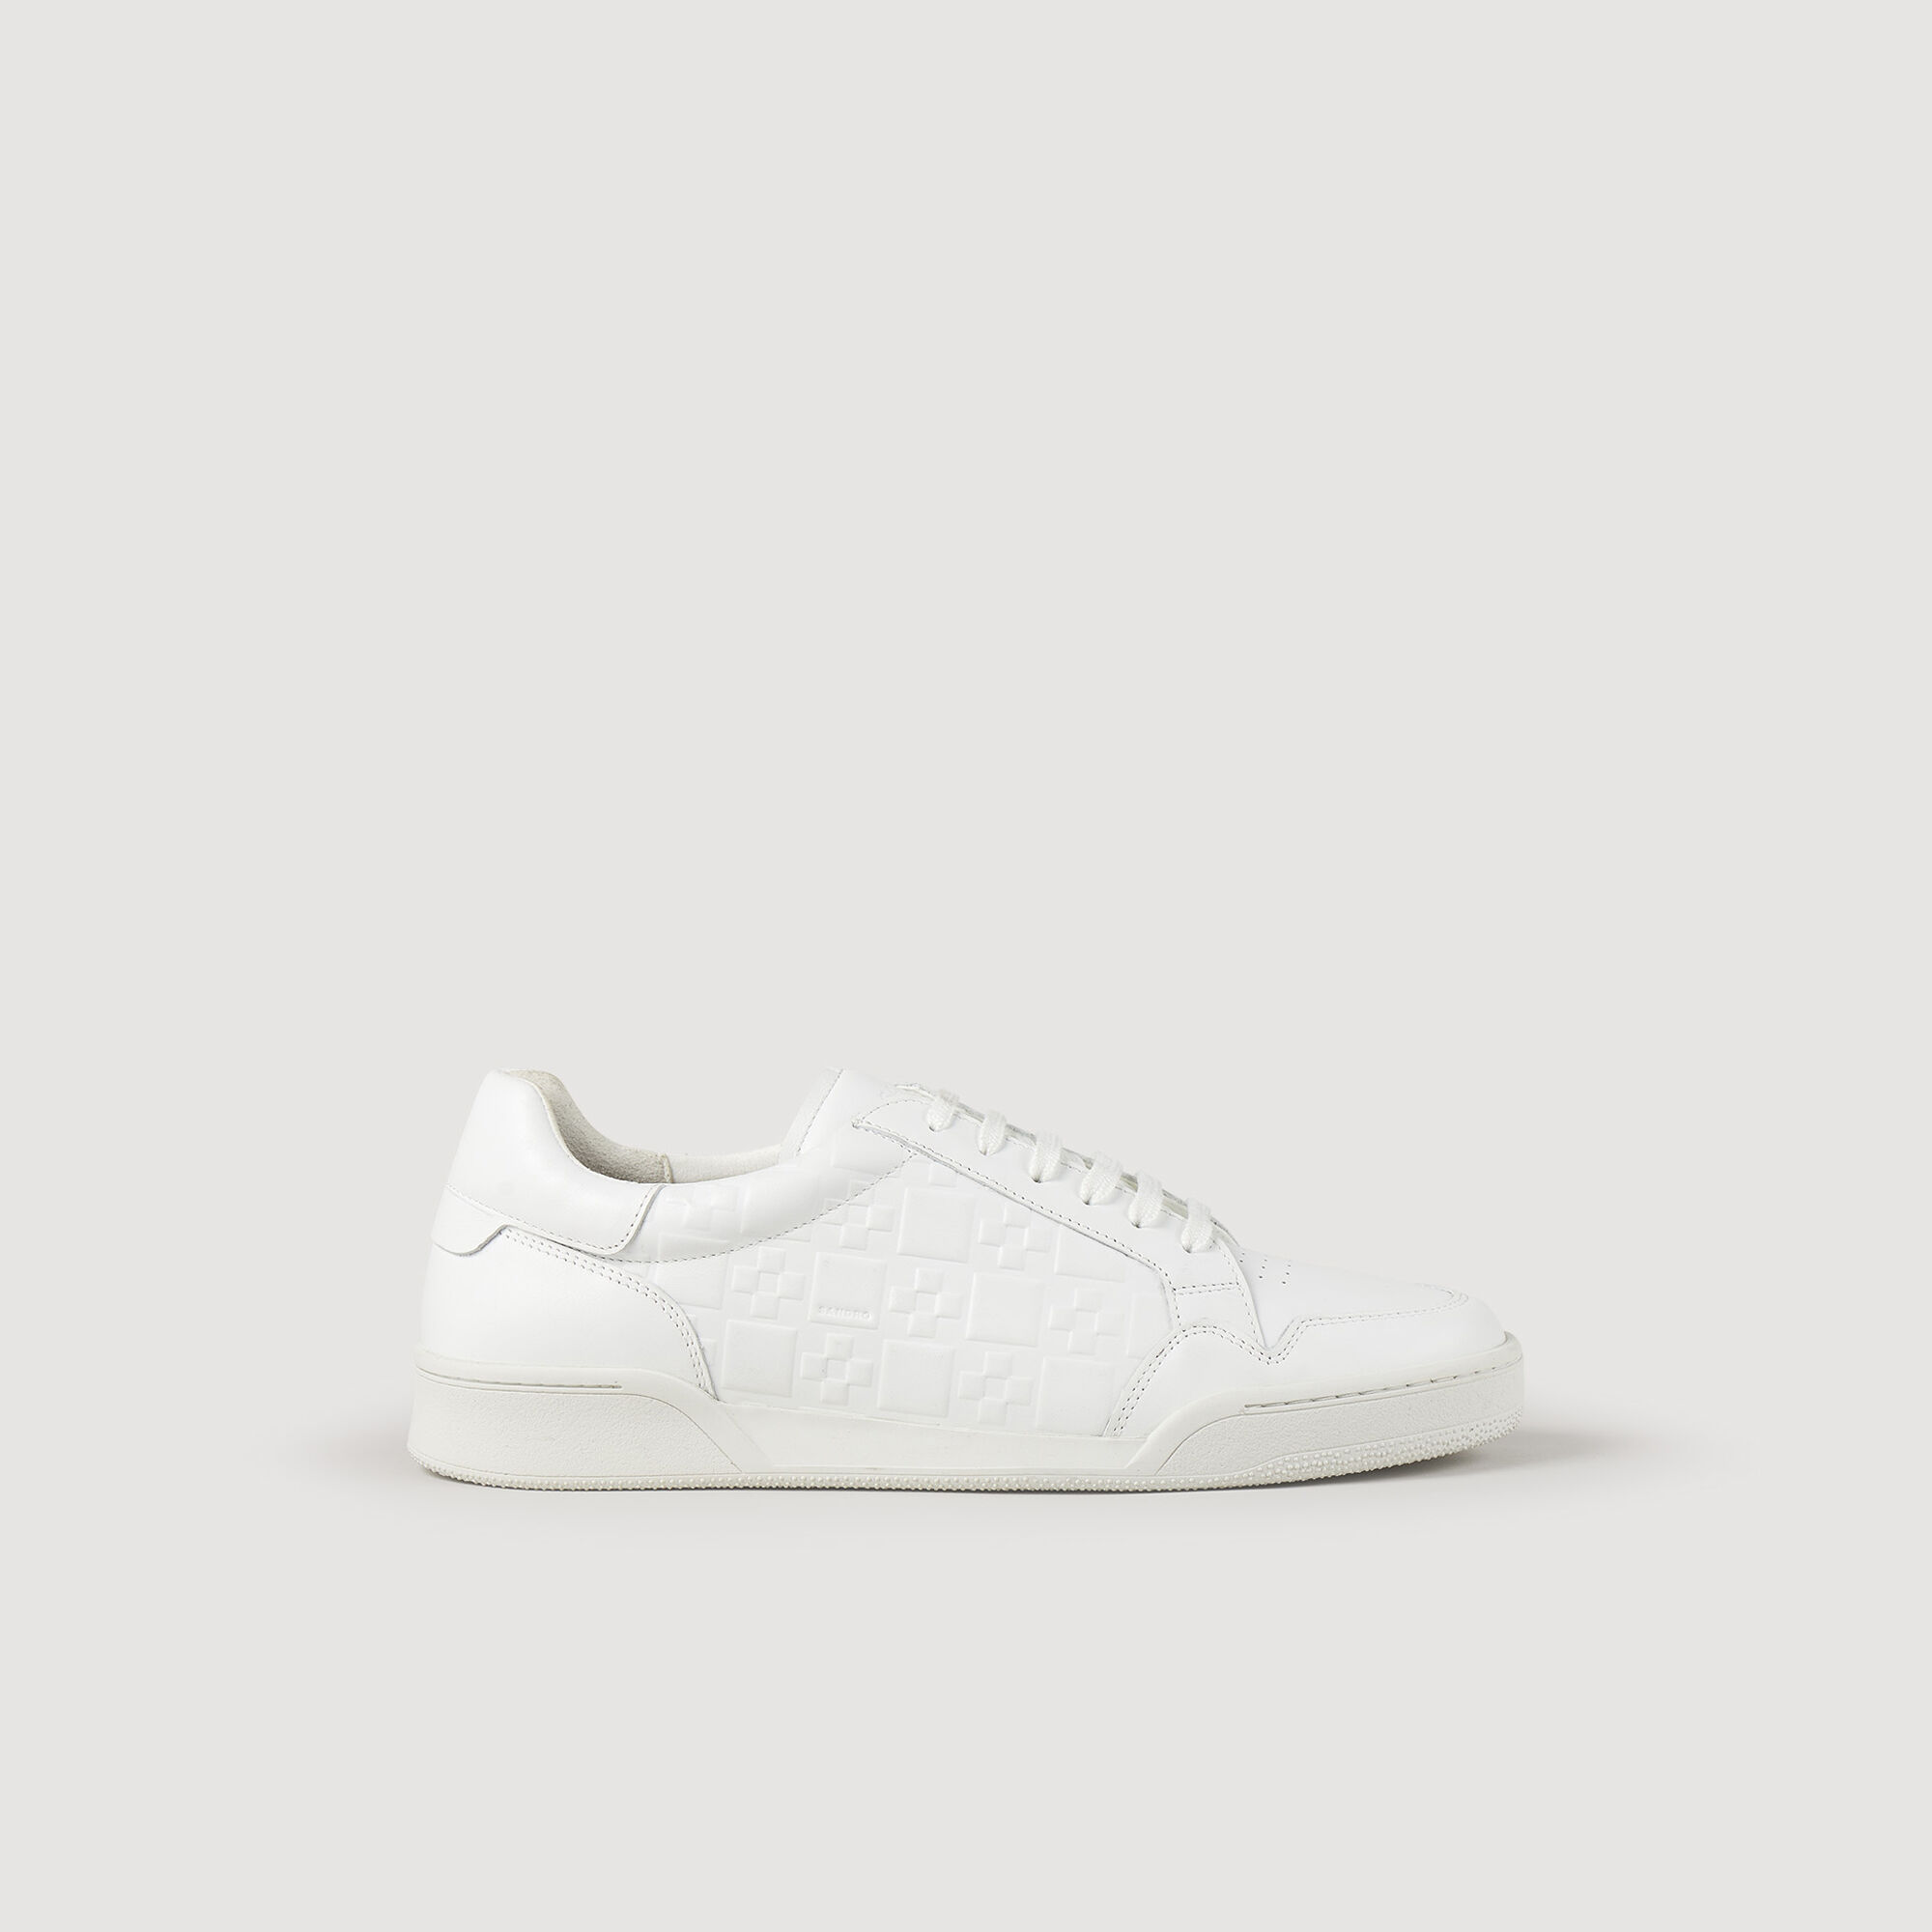 Sandro Embossed square cross leather sneakers - male - white -  Men-All Shoes-FR 40 / US 7.5